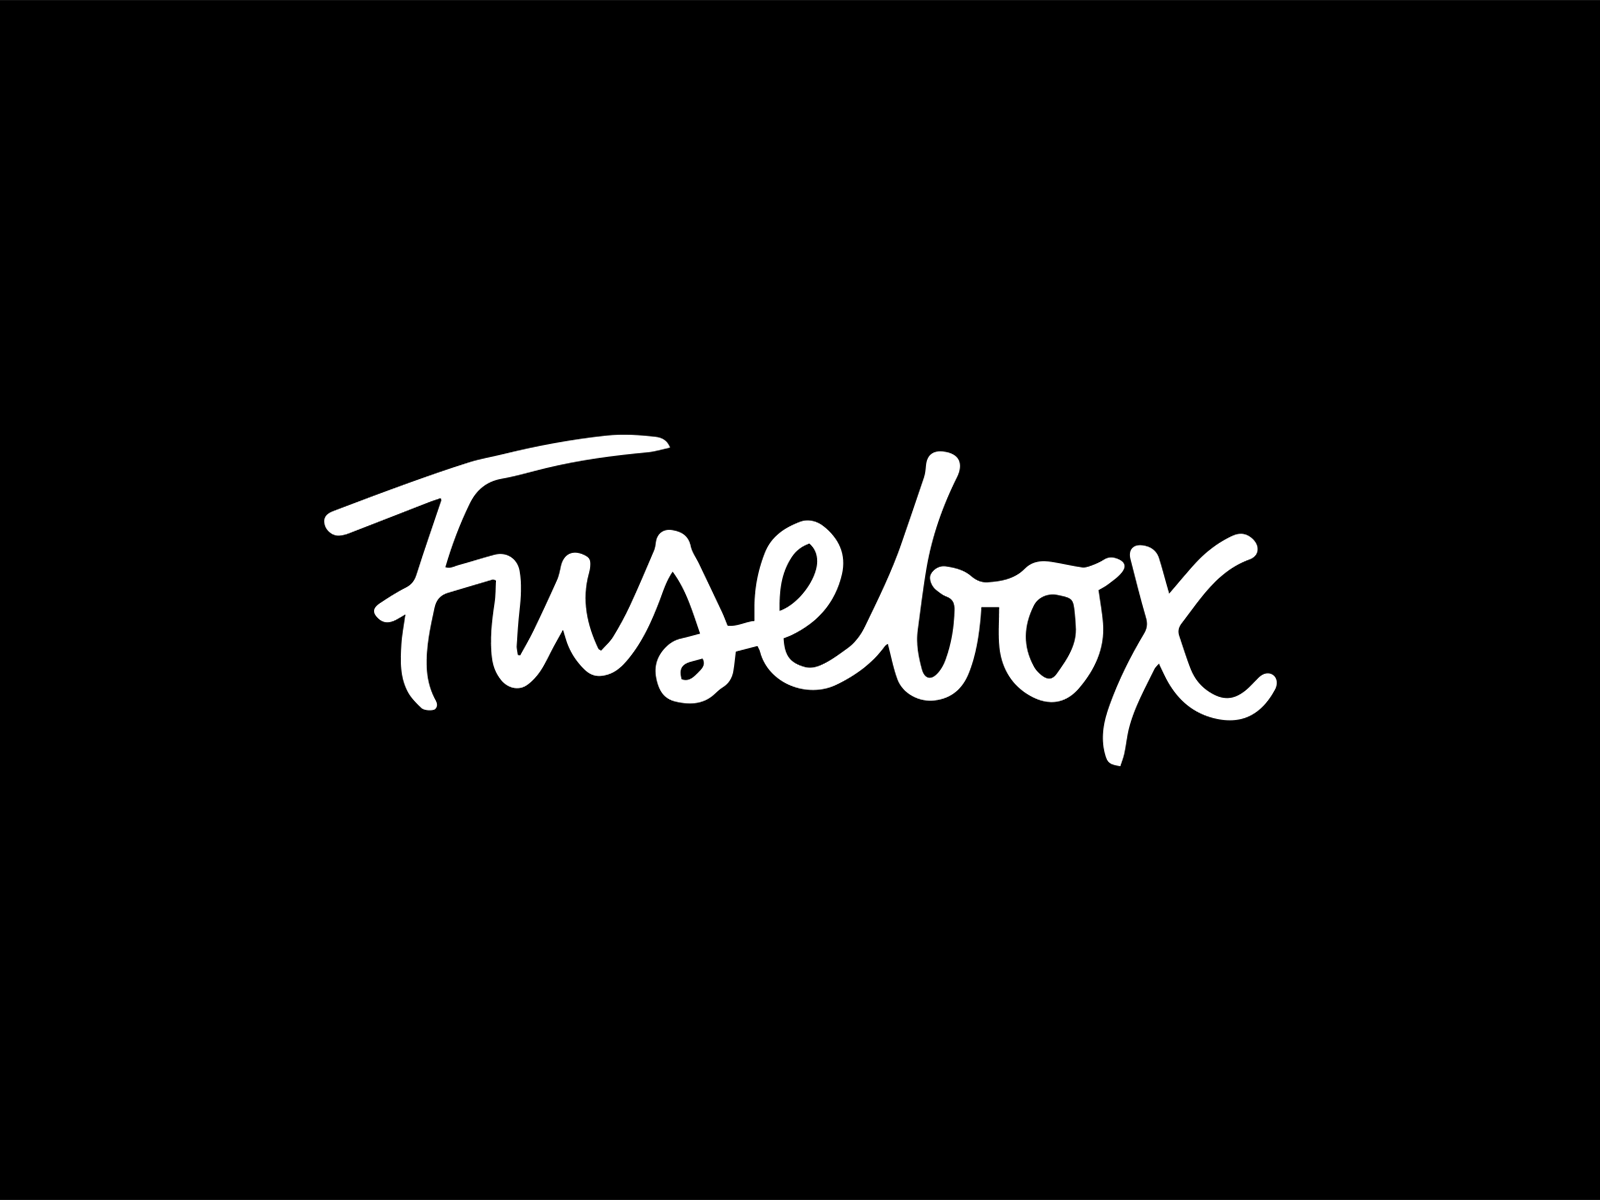 Fusebox initial sketches